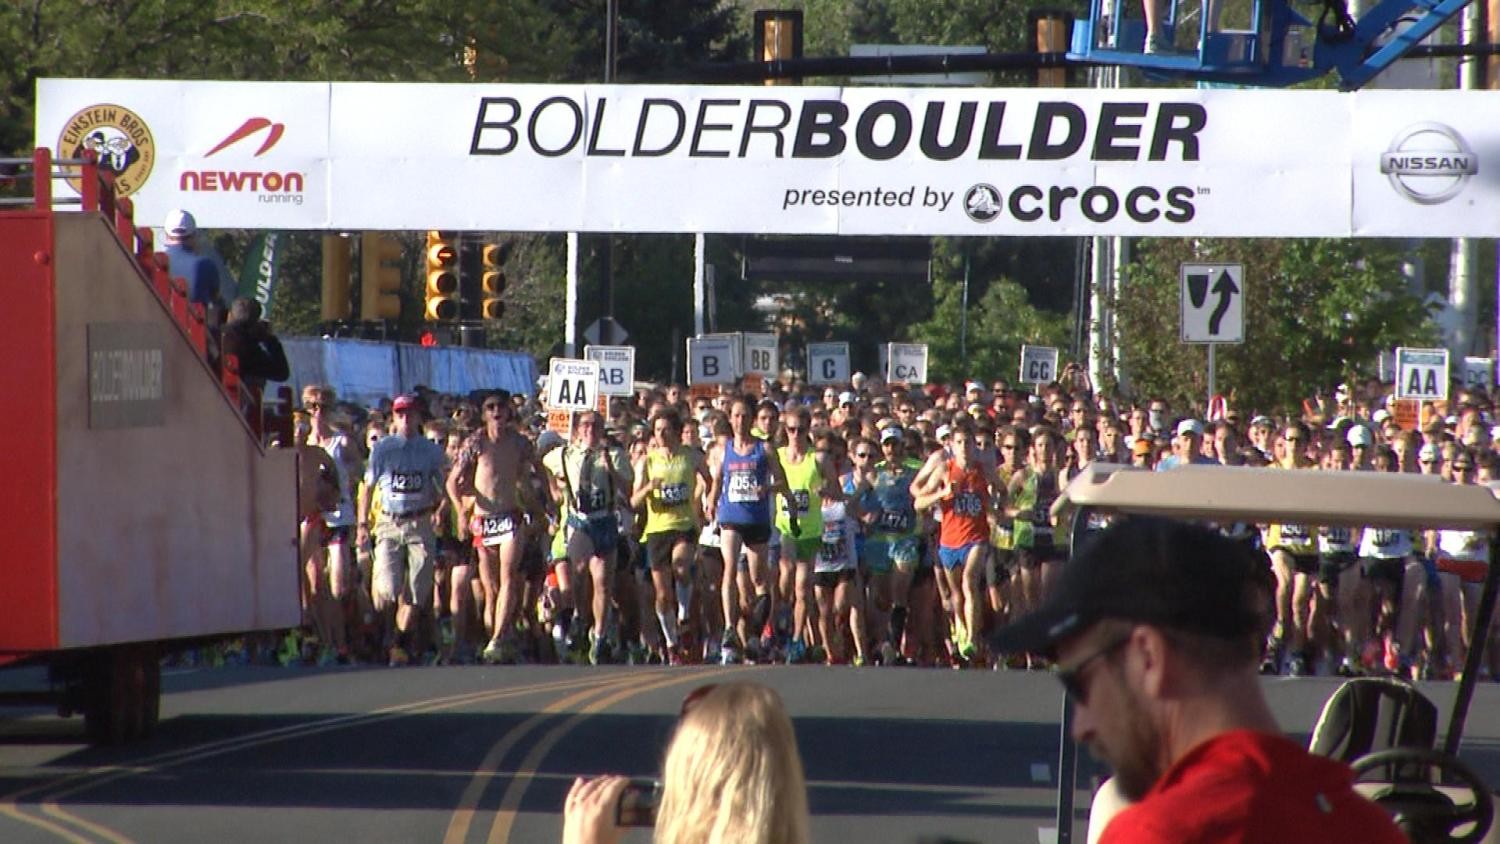 Bolder Boulder 10k has been moved from Memorial Day to Labor Day